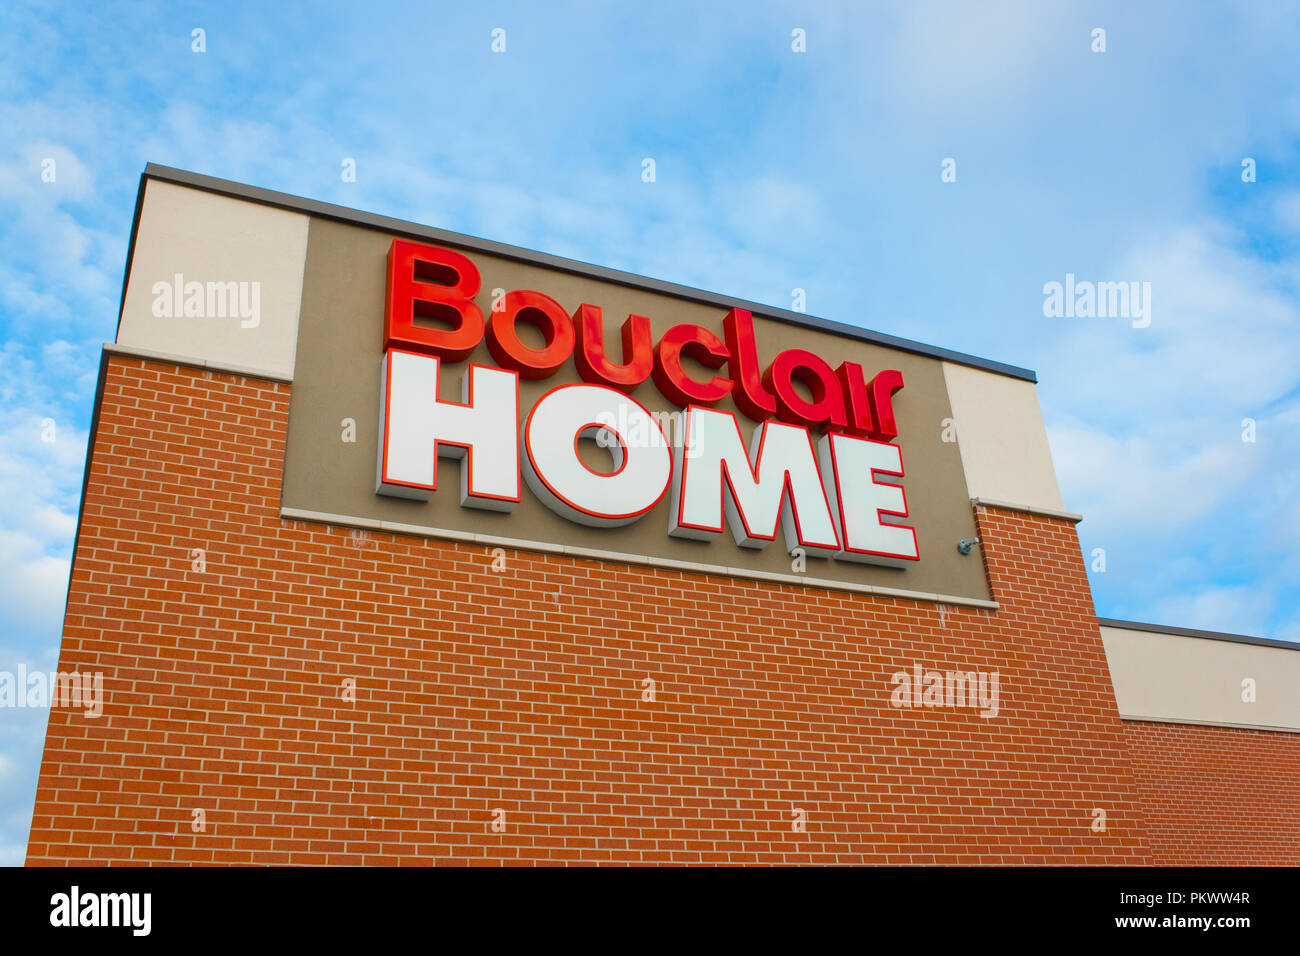 DARTMOUTH, CANADA - MAY 07, 2014: Bouclair Home outlet sign. Bouclair Home is a Canadian home decorating retail chain headquarterd in Quebec and has o Stock Photo